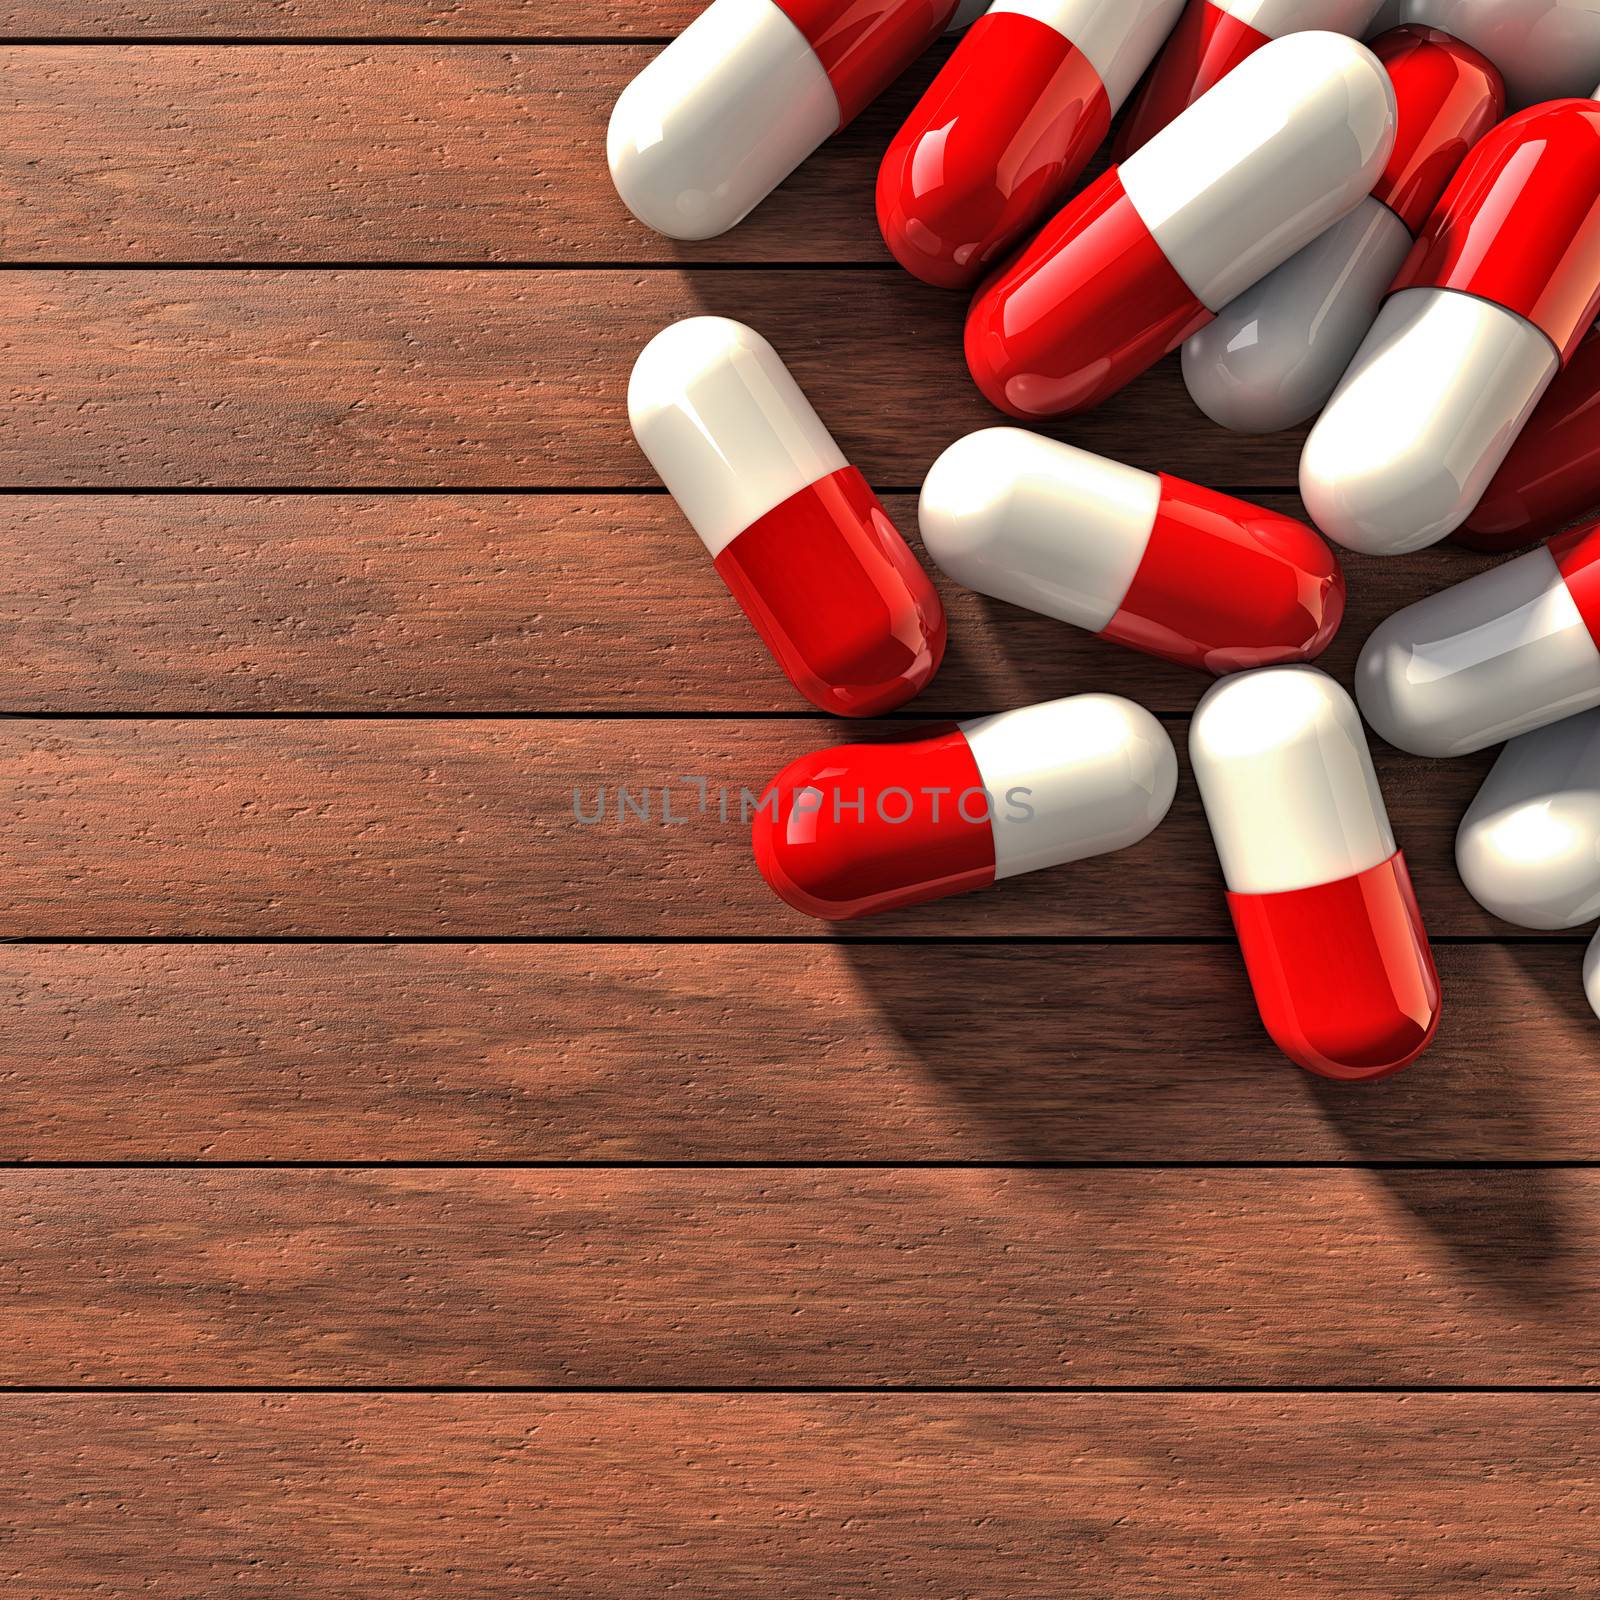 Several pills on a wood table